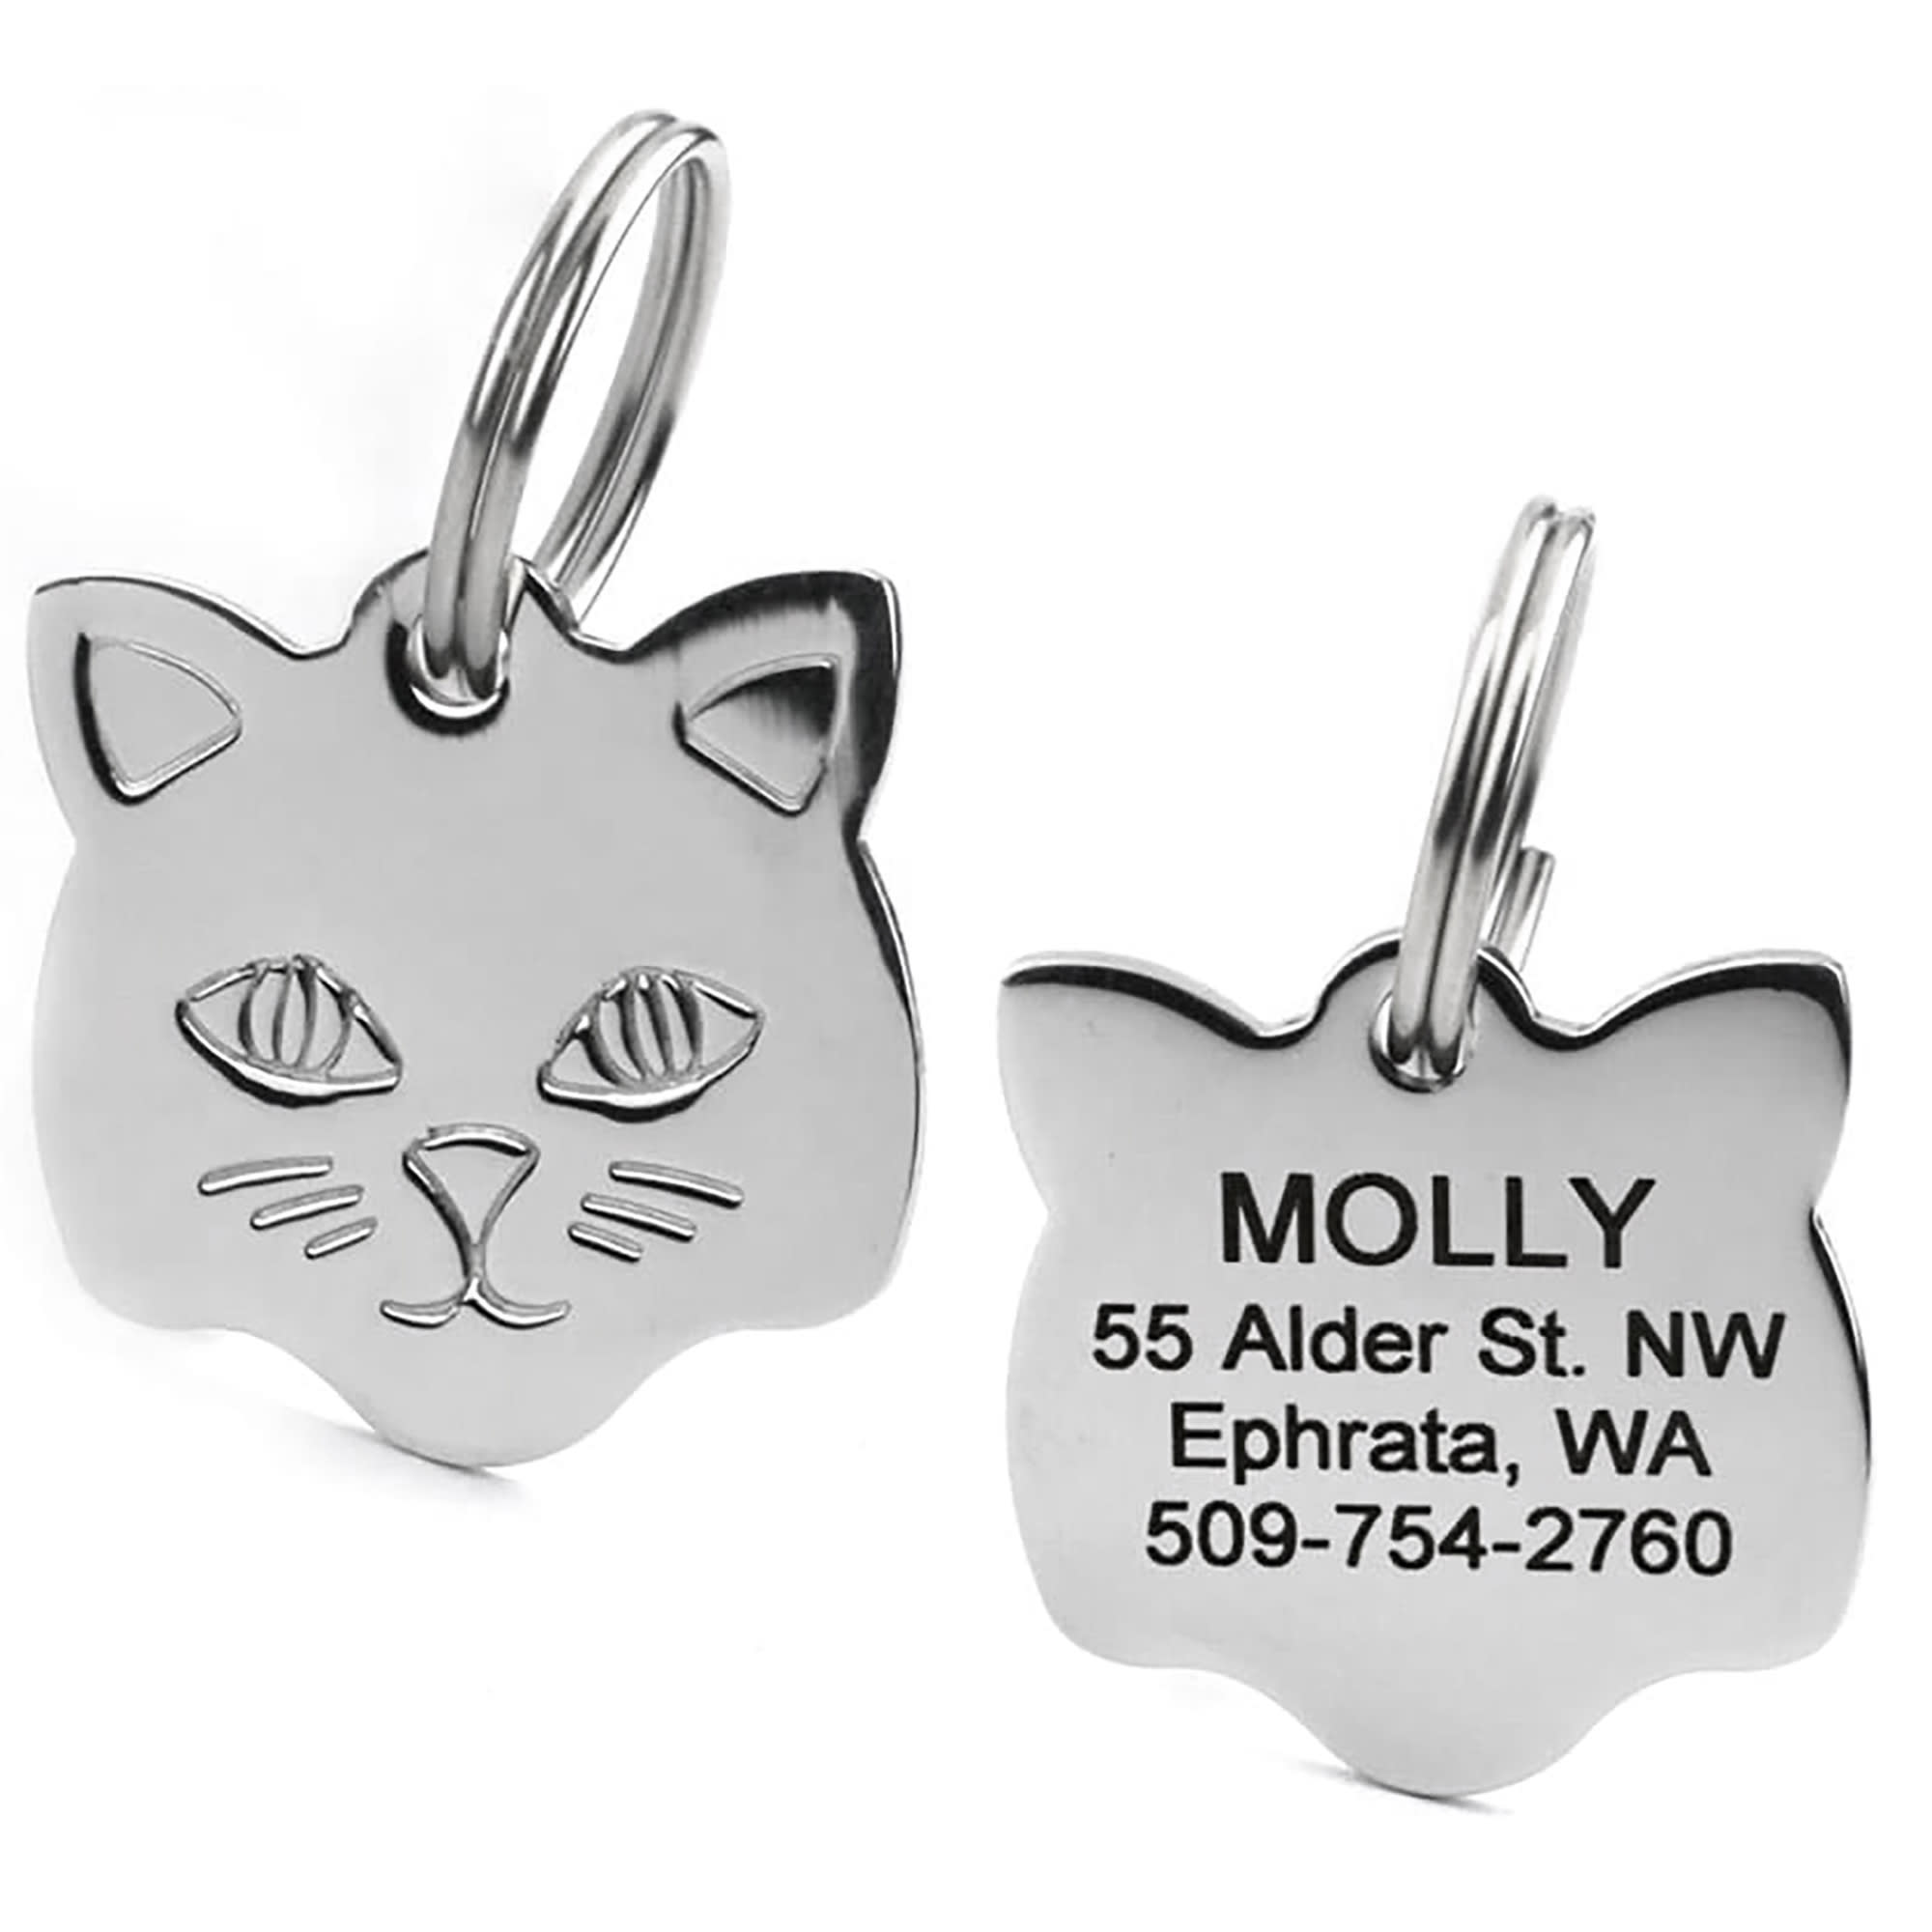 KEEP YOUR PET SAFE DEEP ENGRAVING by BowWowMeow Engraved Cat Tag Aluminium Cat Face Lightweight and Durable Aluminium Tags Small Red Cat Face 5 YEAR GUARANTEE Personalised Engraving